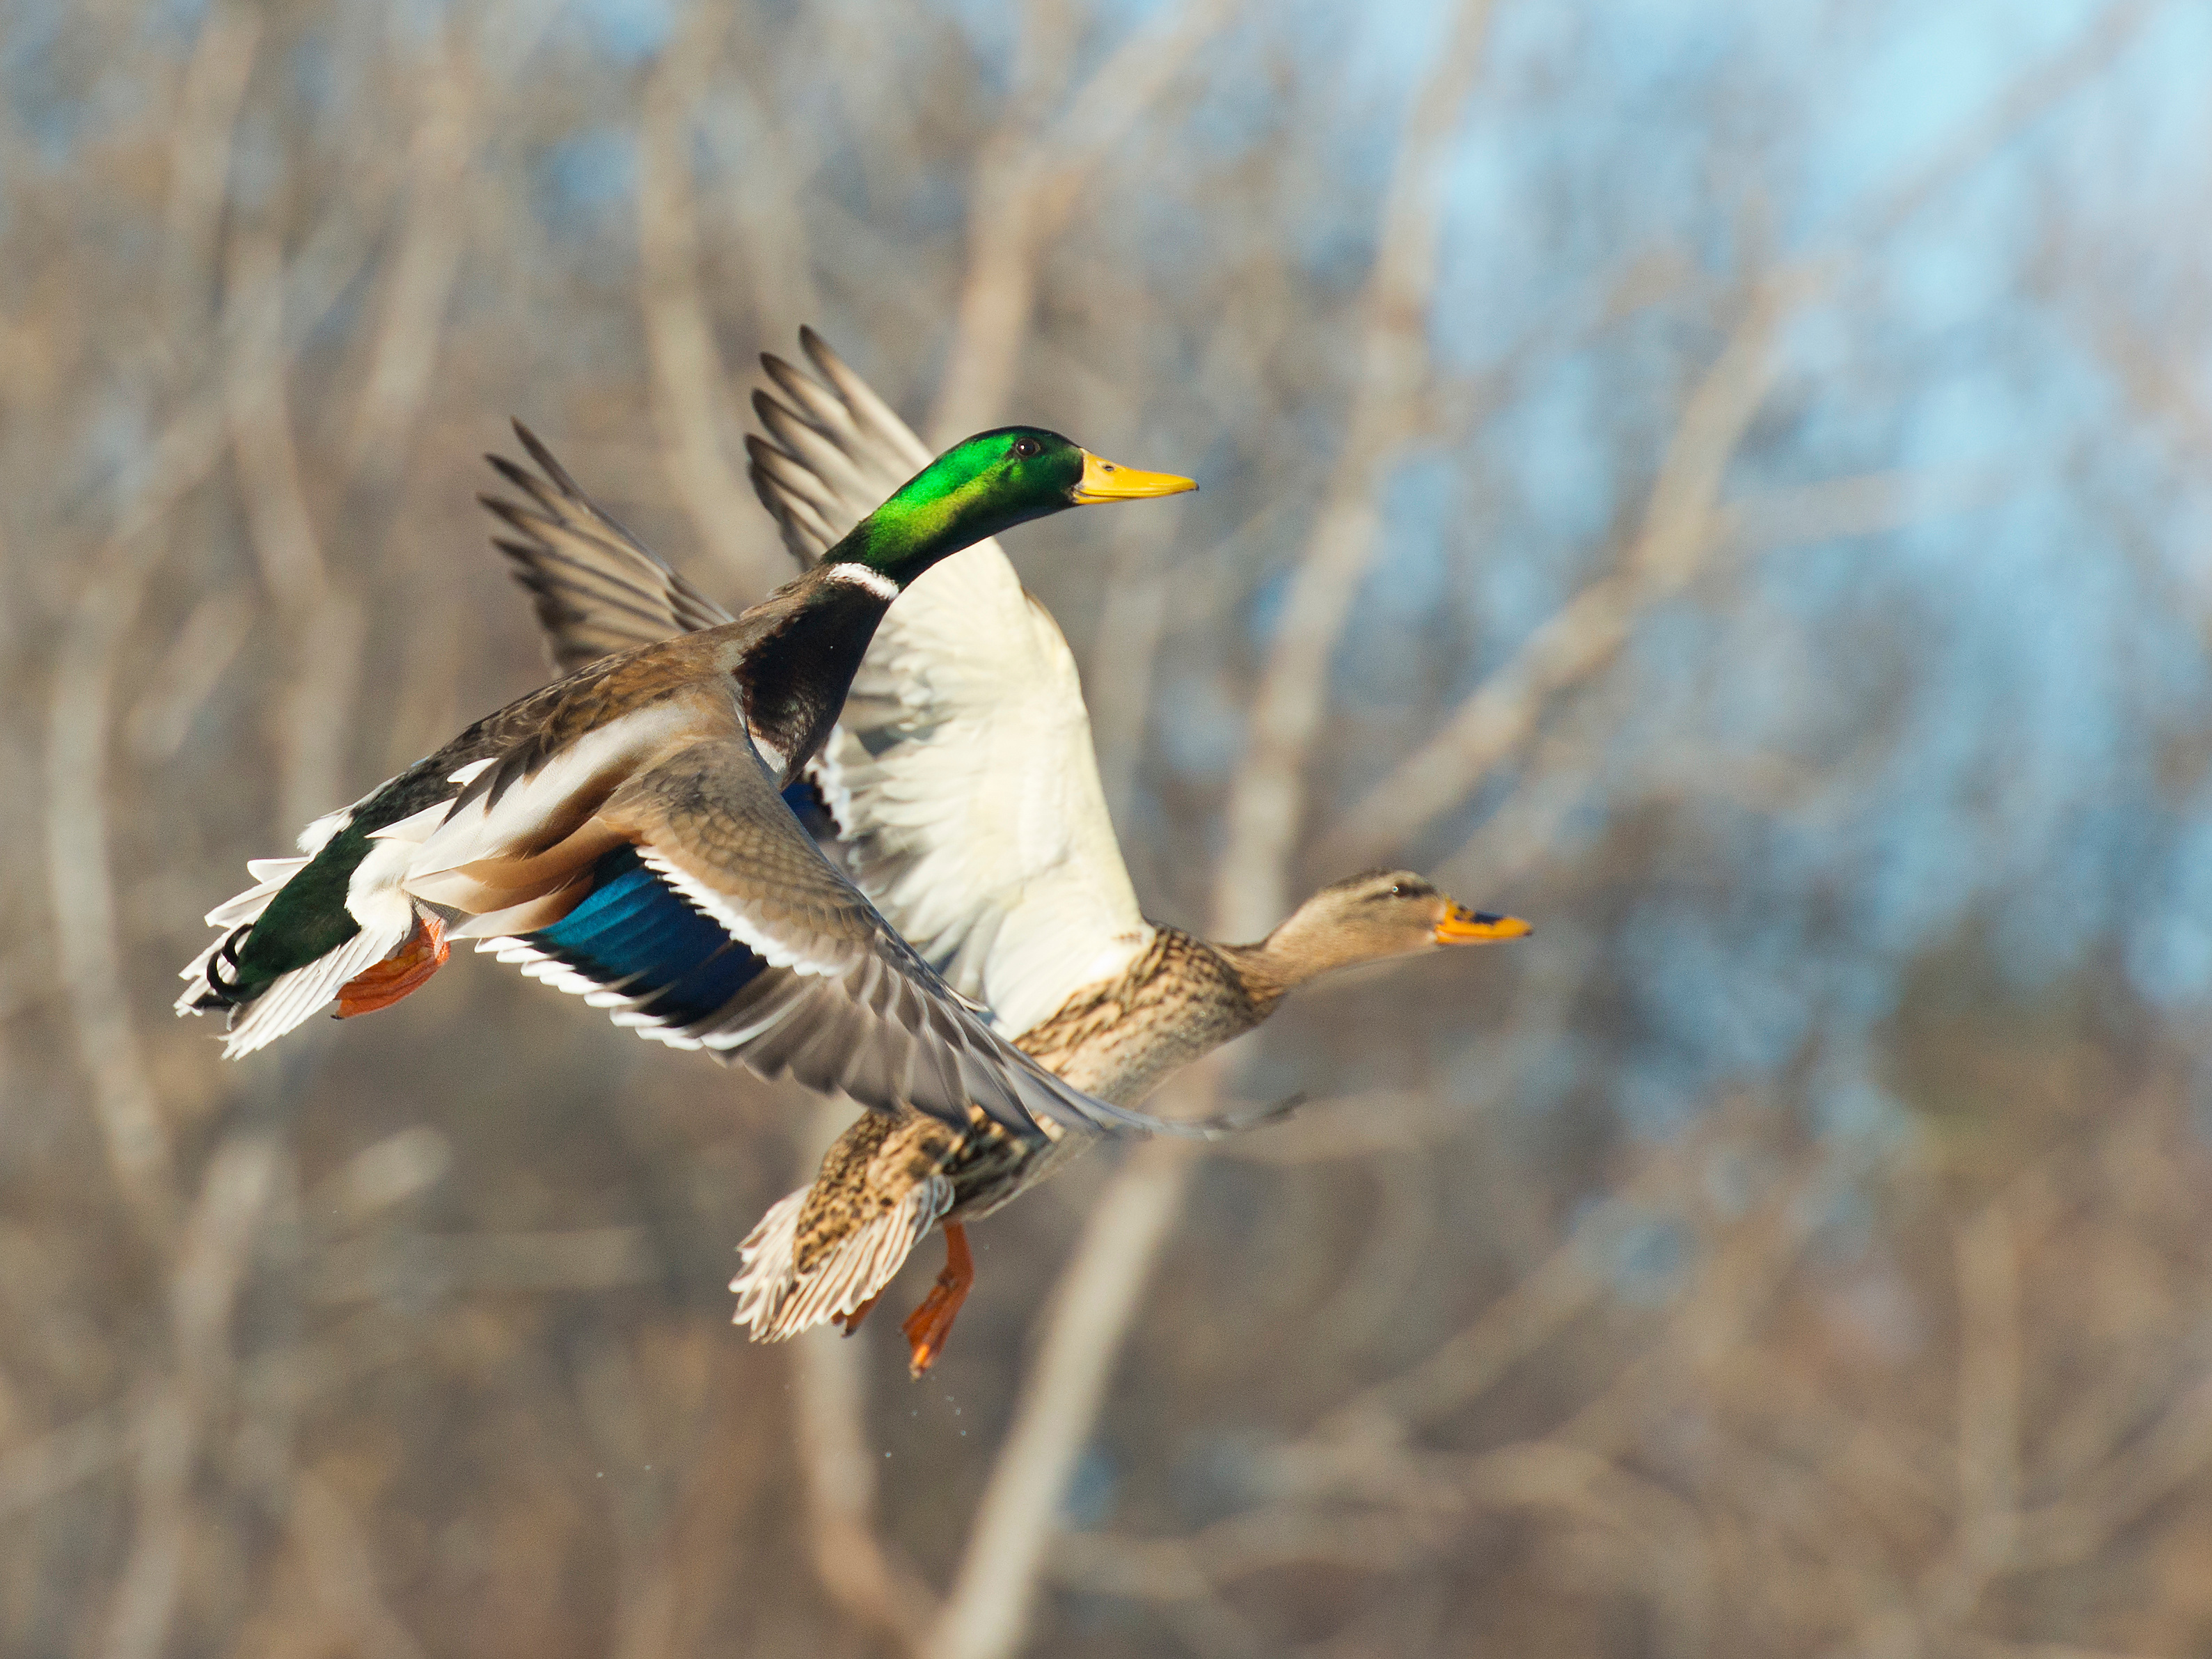 Ducks in flight, hunting dogs to flush out birds concept. 